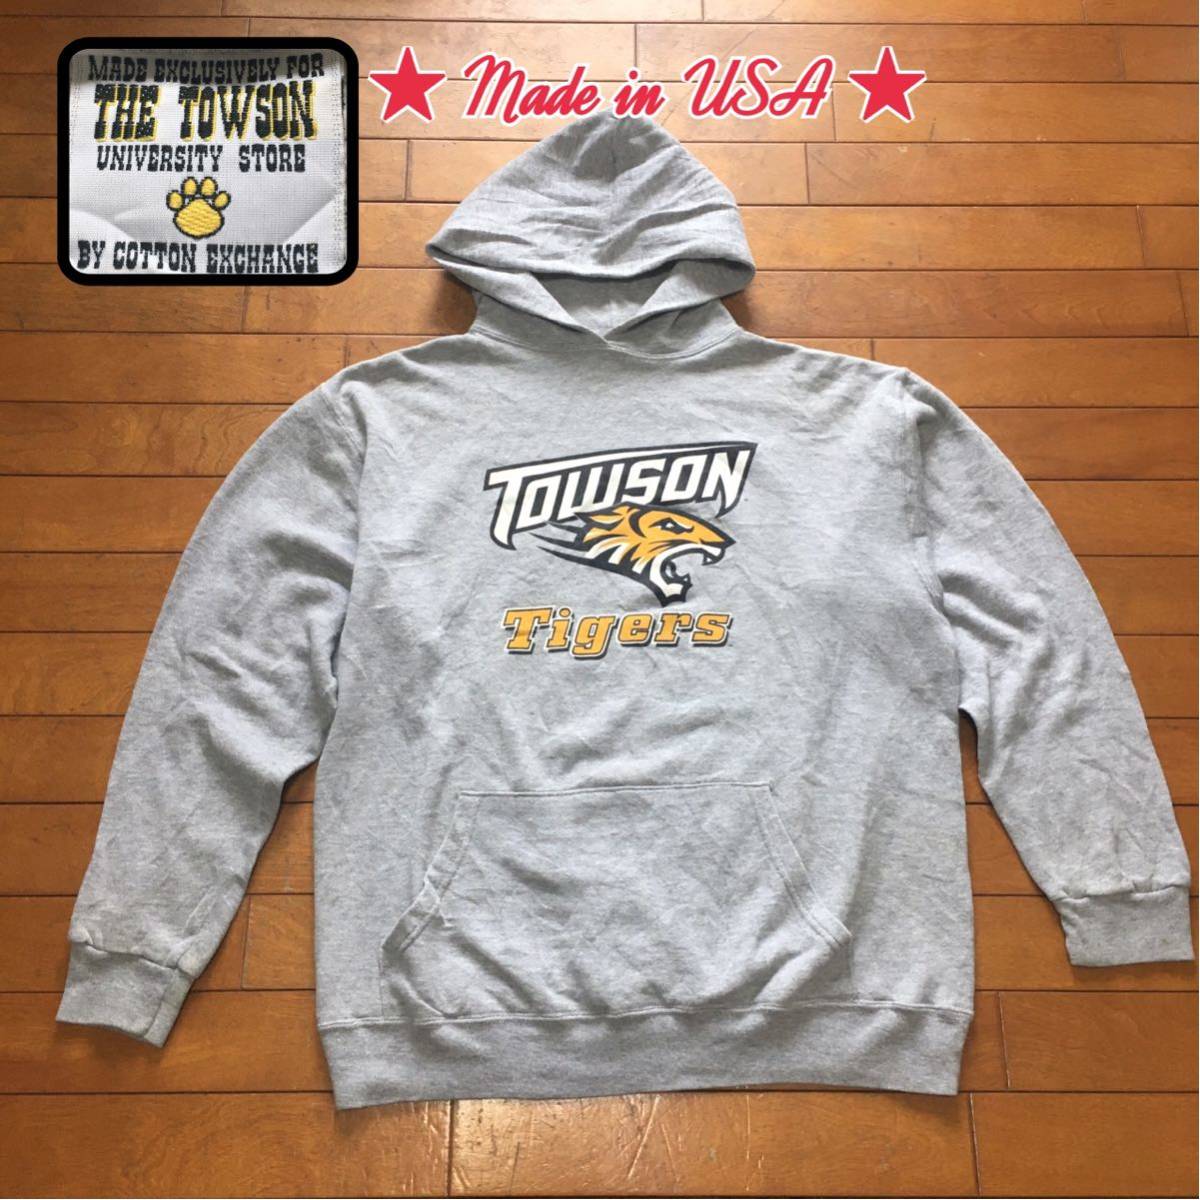 ☆【 THE TOWSON 】★ Made in USA tigers カレッジスエットパーカー ★サイズL_画像1